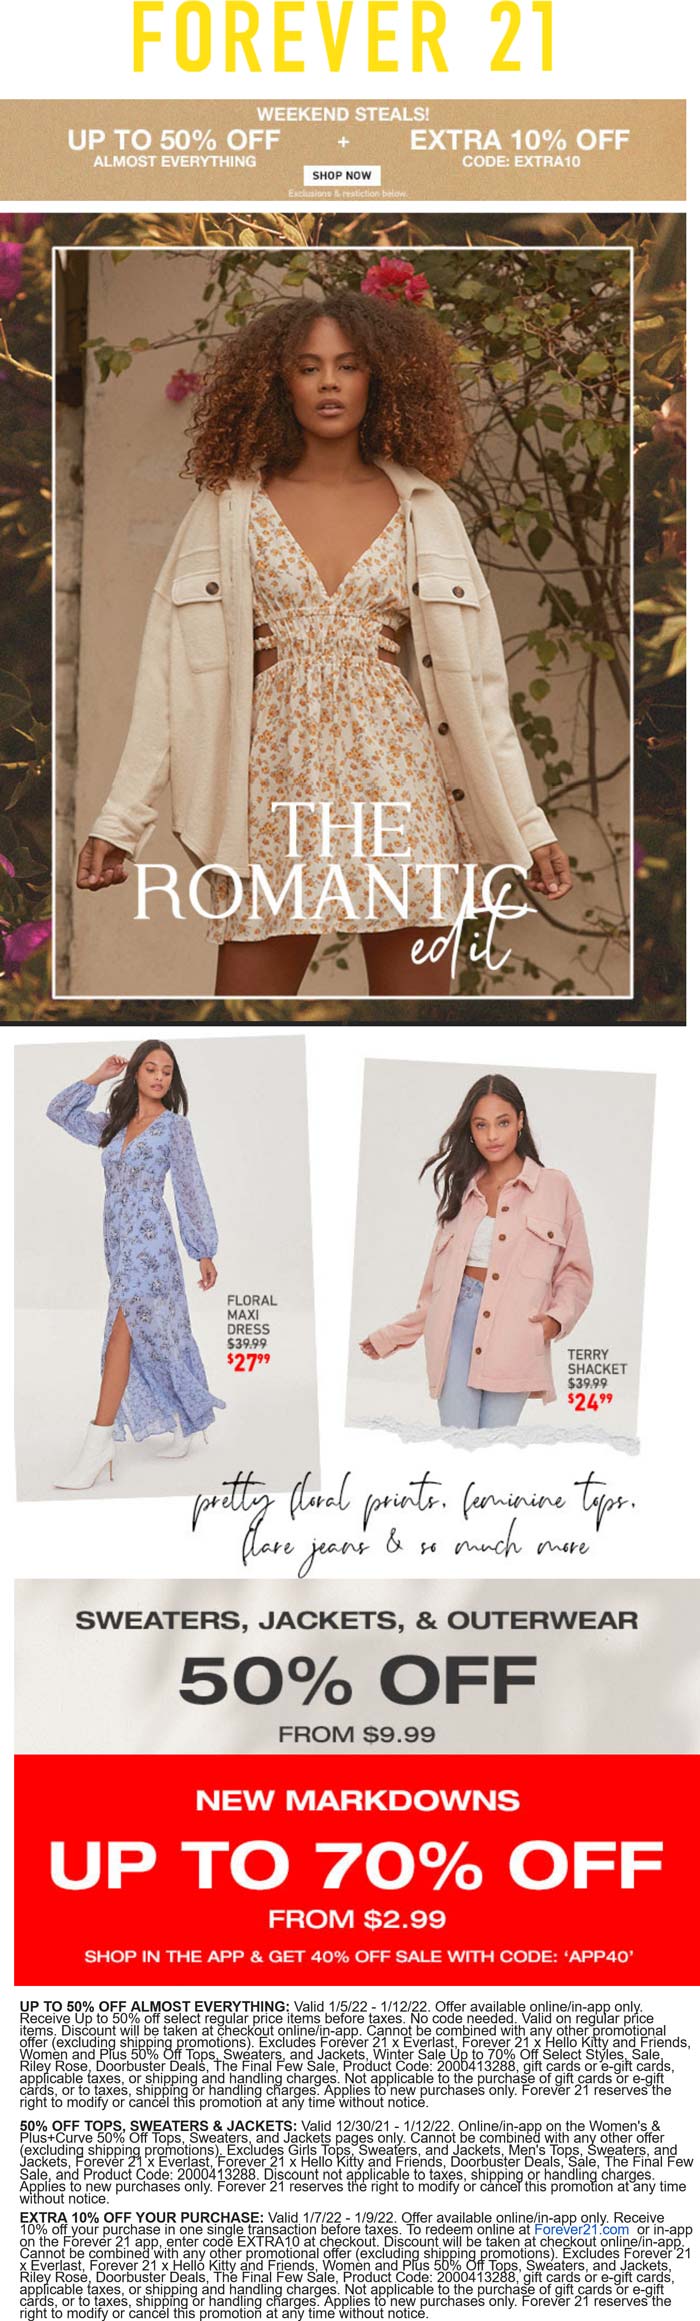 Forever 21 stores Coupon  10-60% off today at Forever 21 via promo code EXTRA10 #forever21 